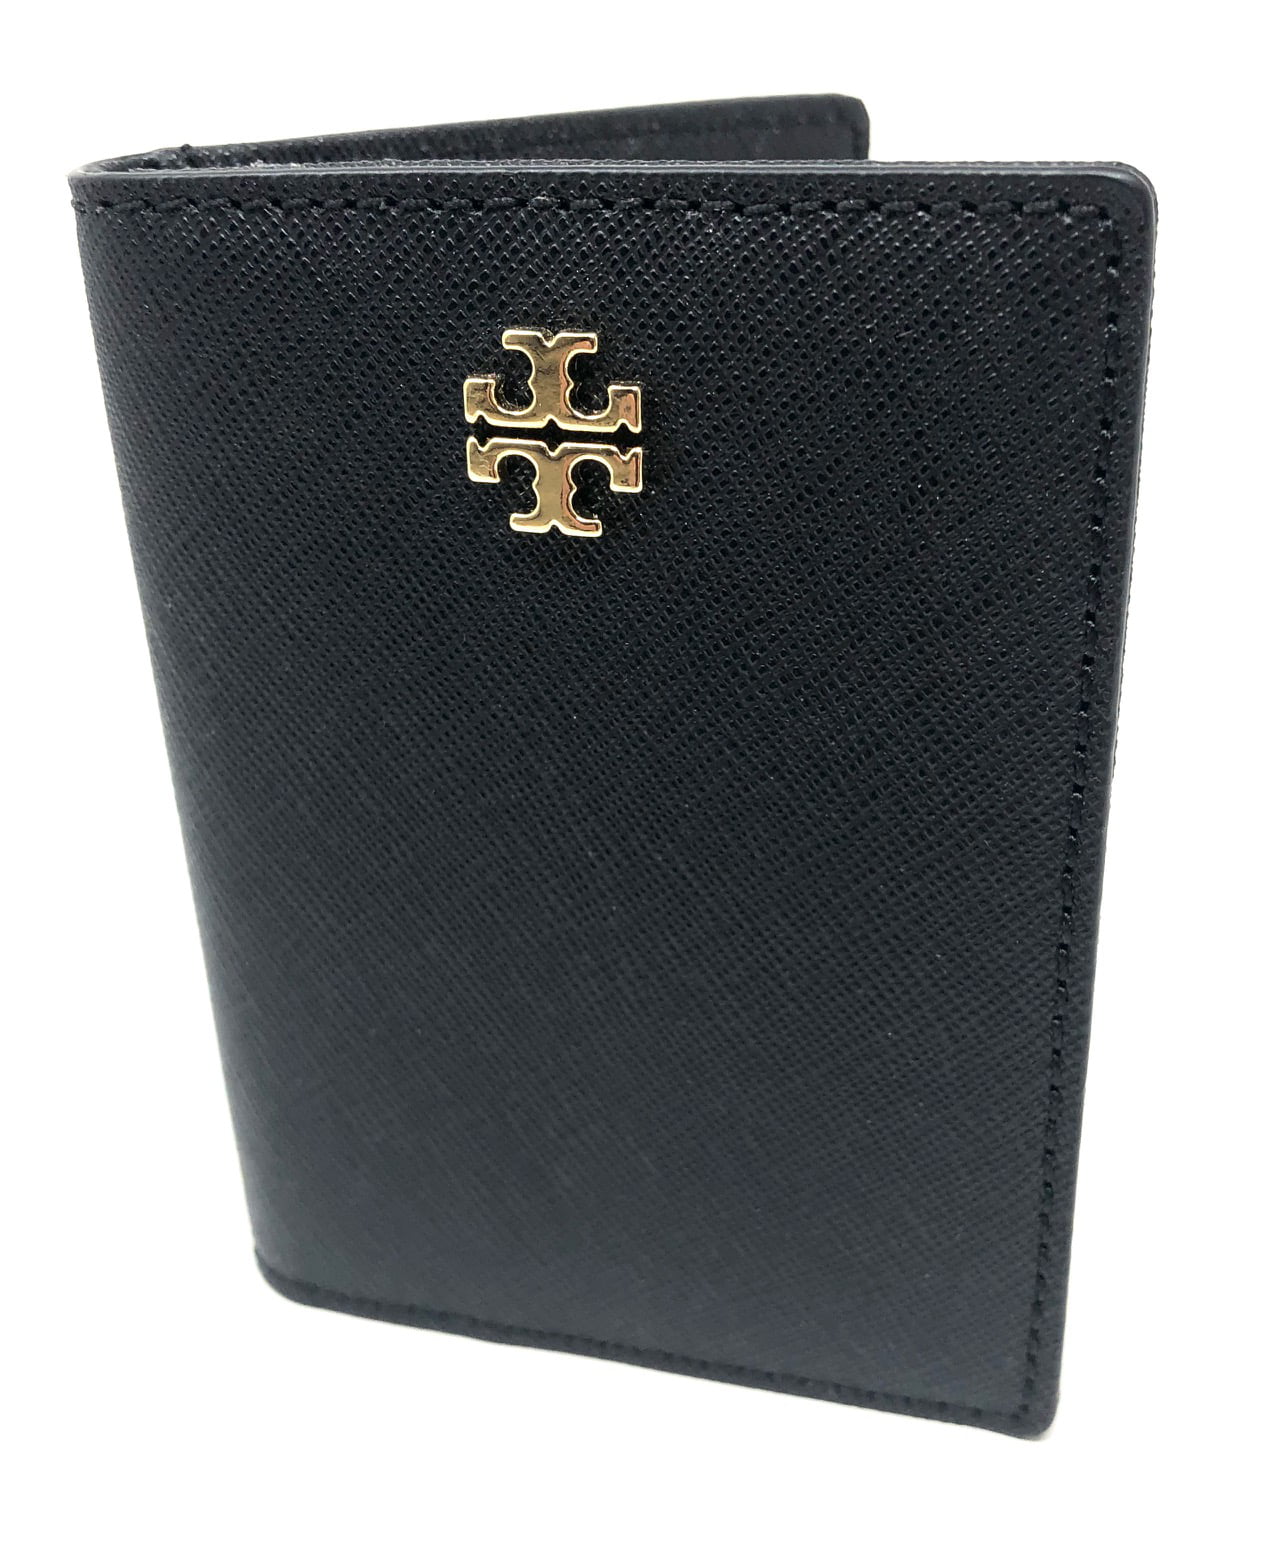 Tory Burch Women's Emerson Saffiano Leather Foldable Card ID Case Wallet  (Black) 